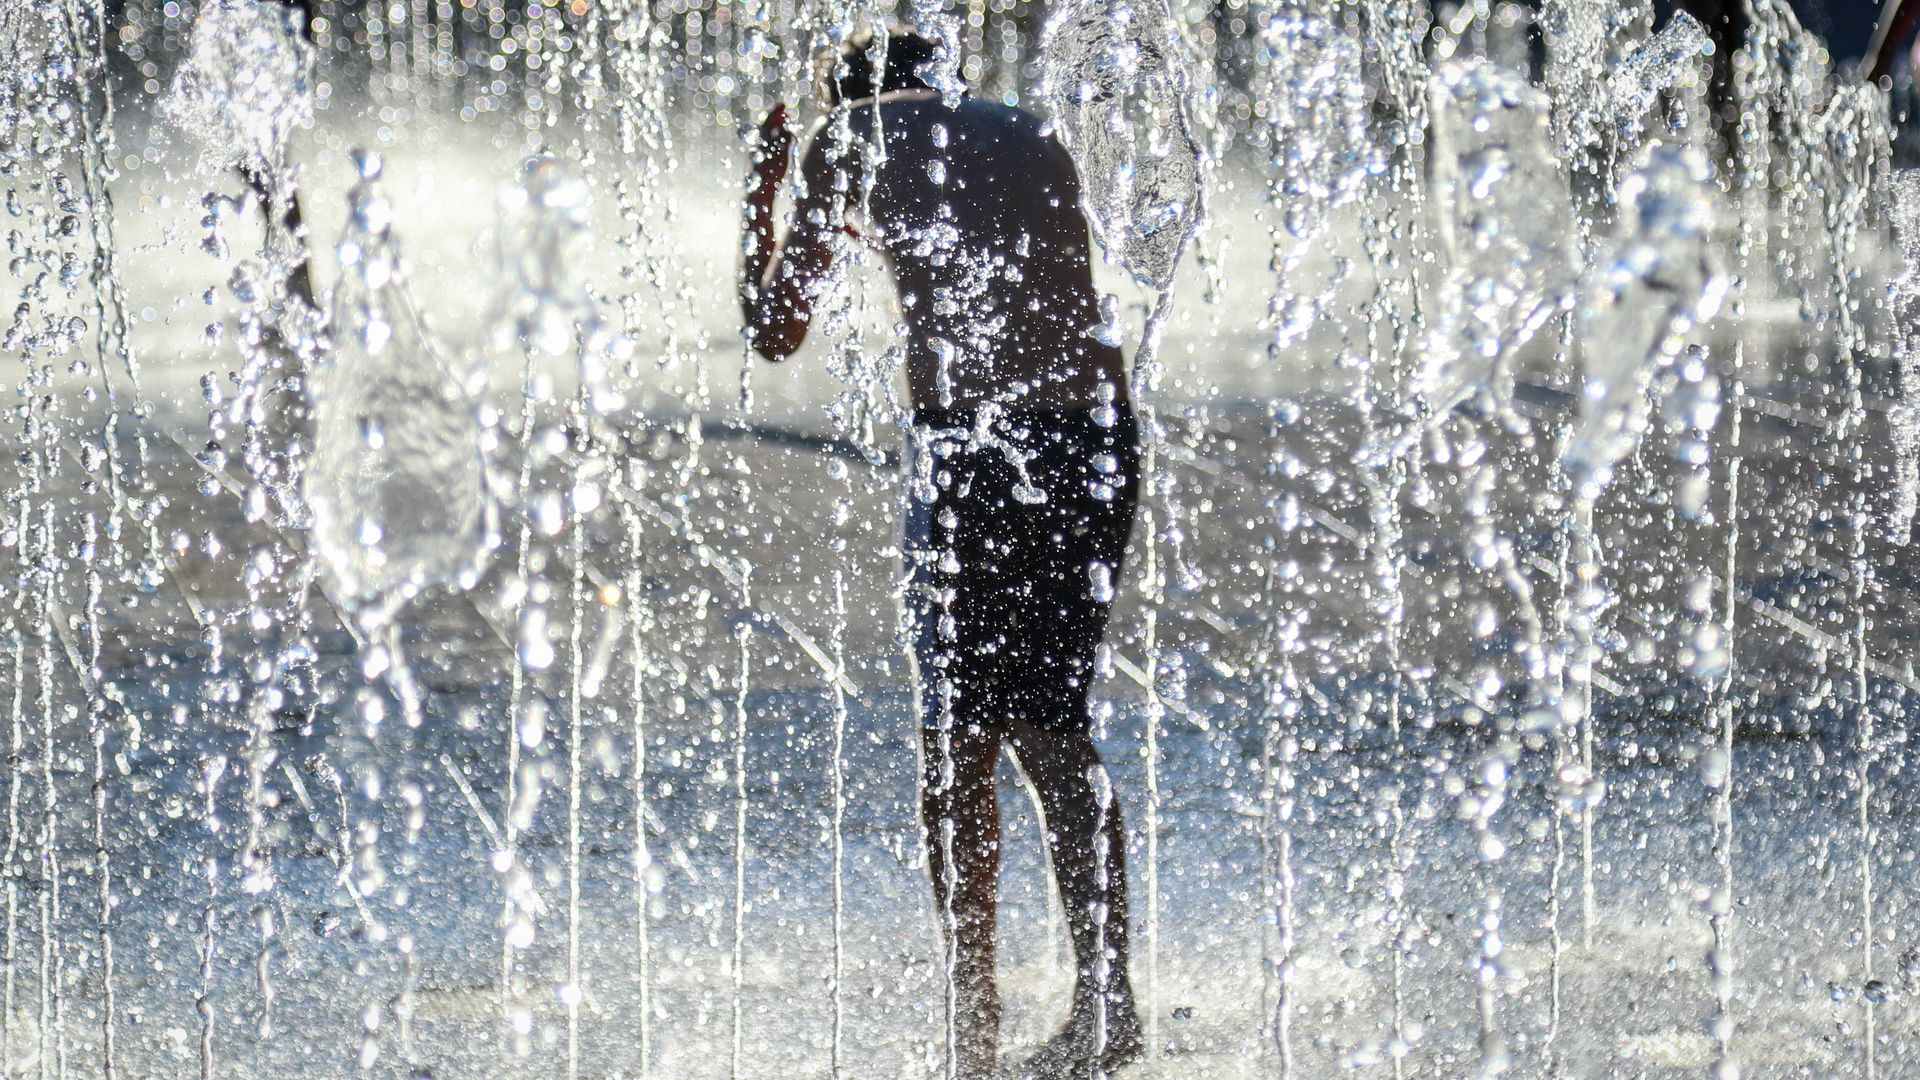 A boy standing in a fountain to keep cool.